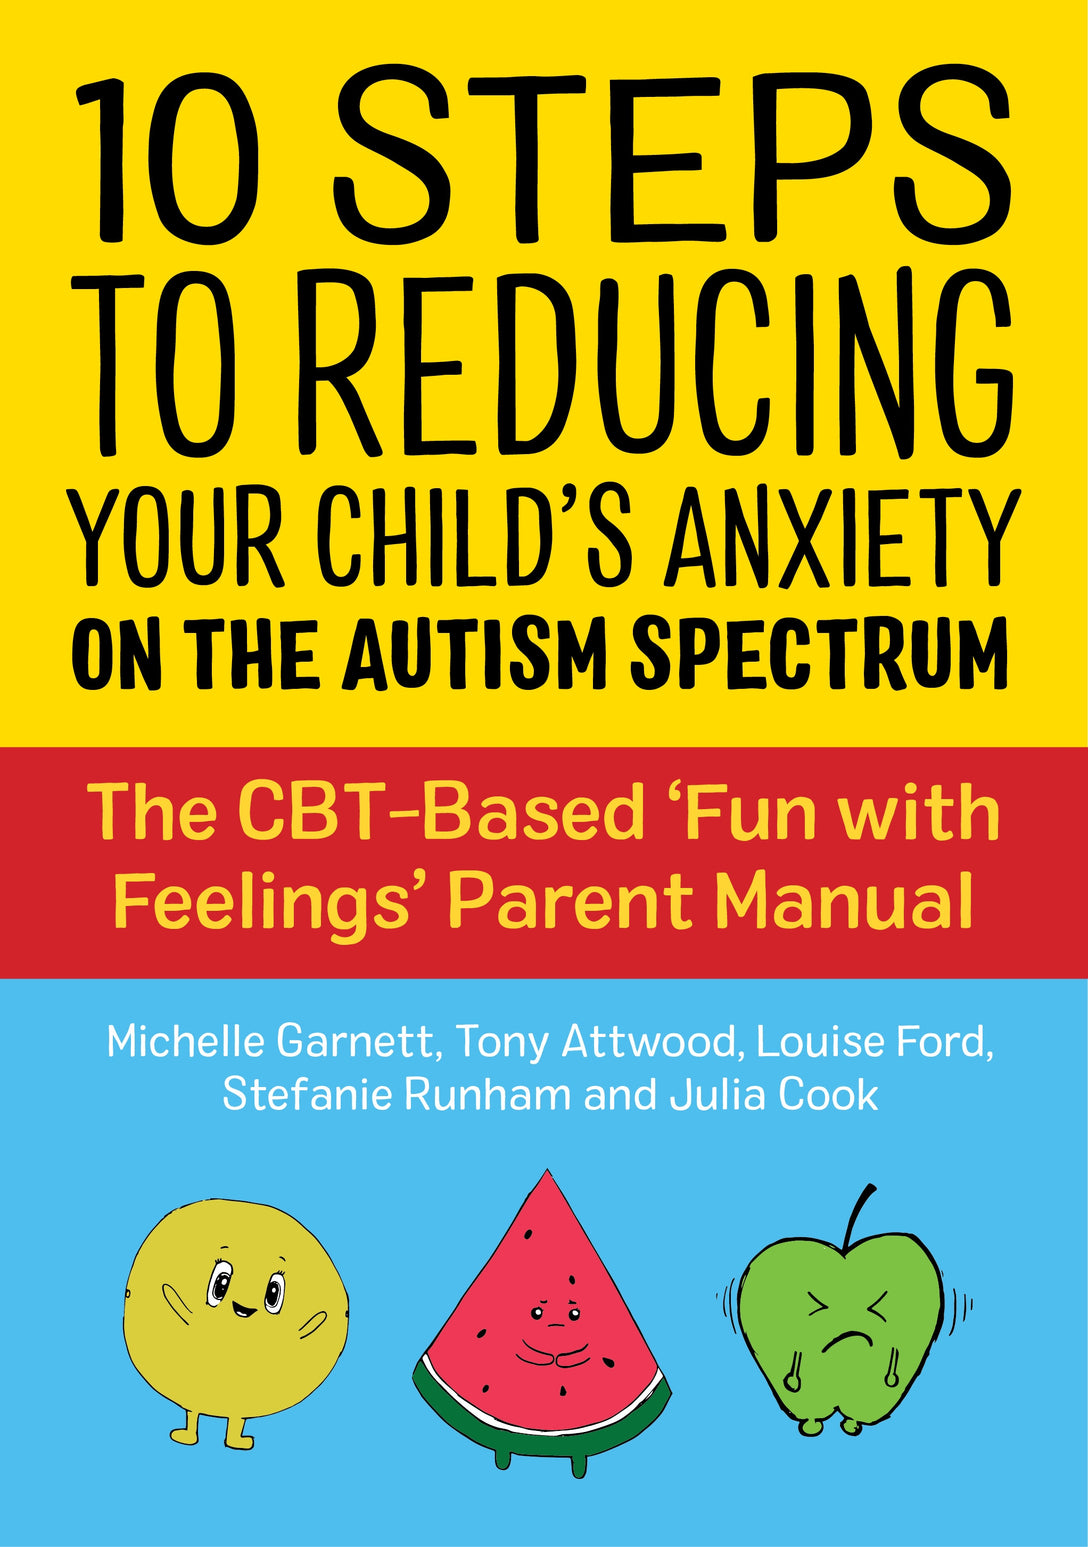 10 Steps to Reducing Your Child's Anxiety on the Autism Spectrum by Michelle Garnett, Dr Anthony Attwood, Julia Cook, Louise Ford, Stefanie Runham